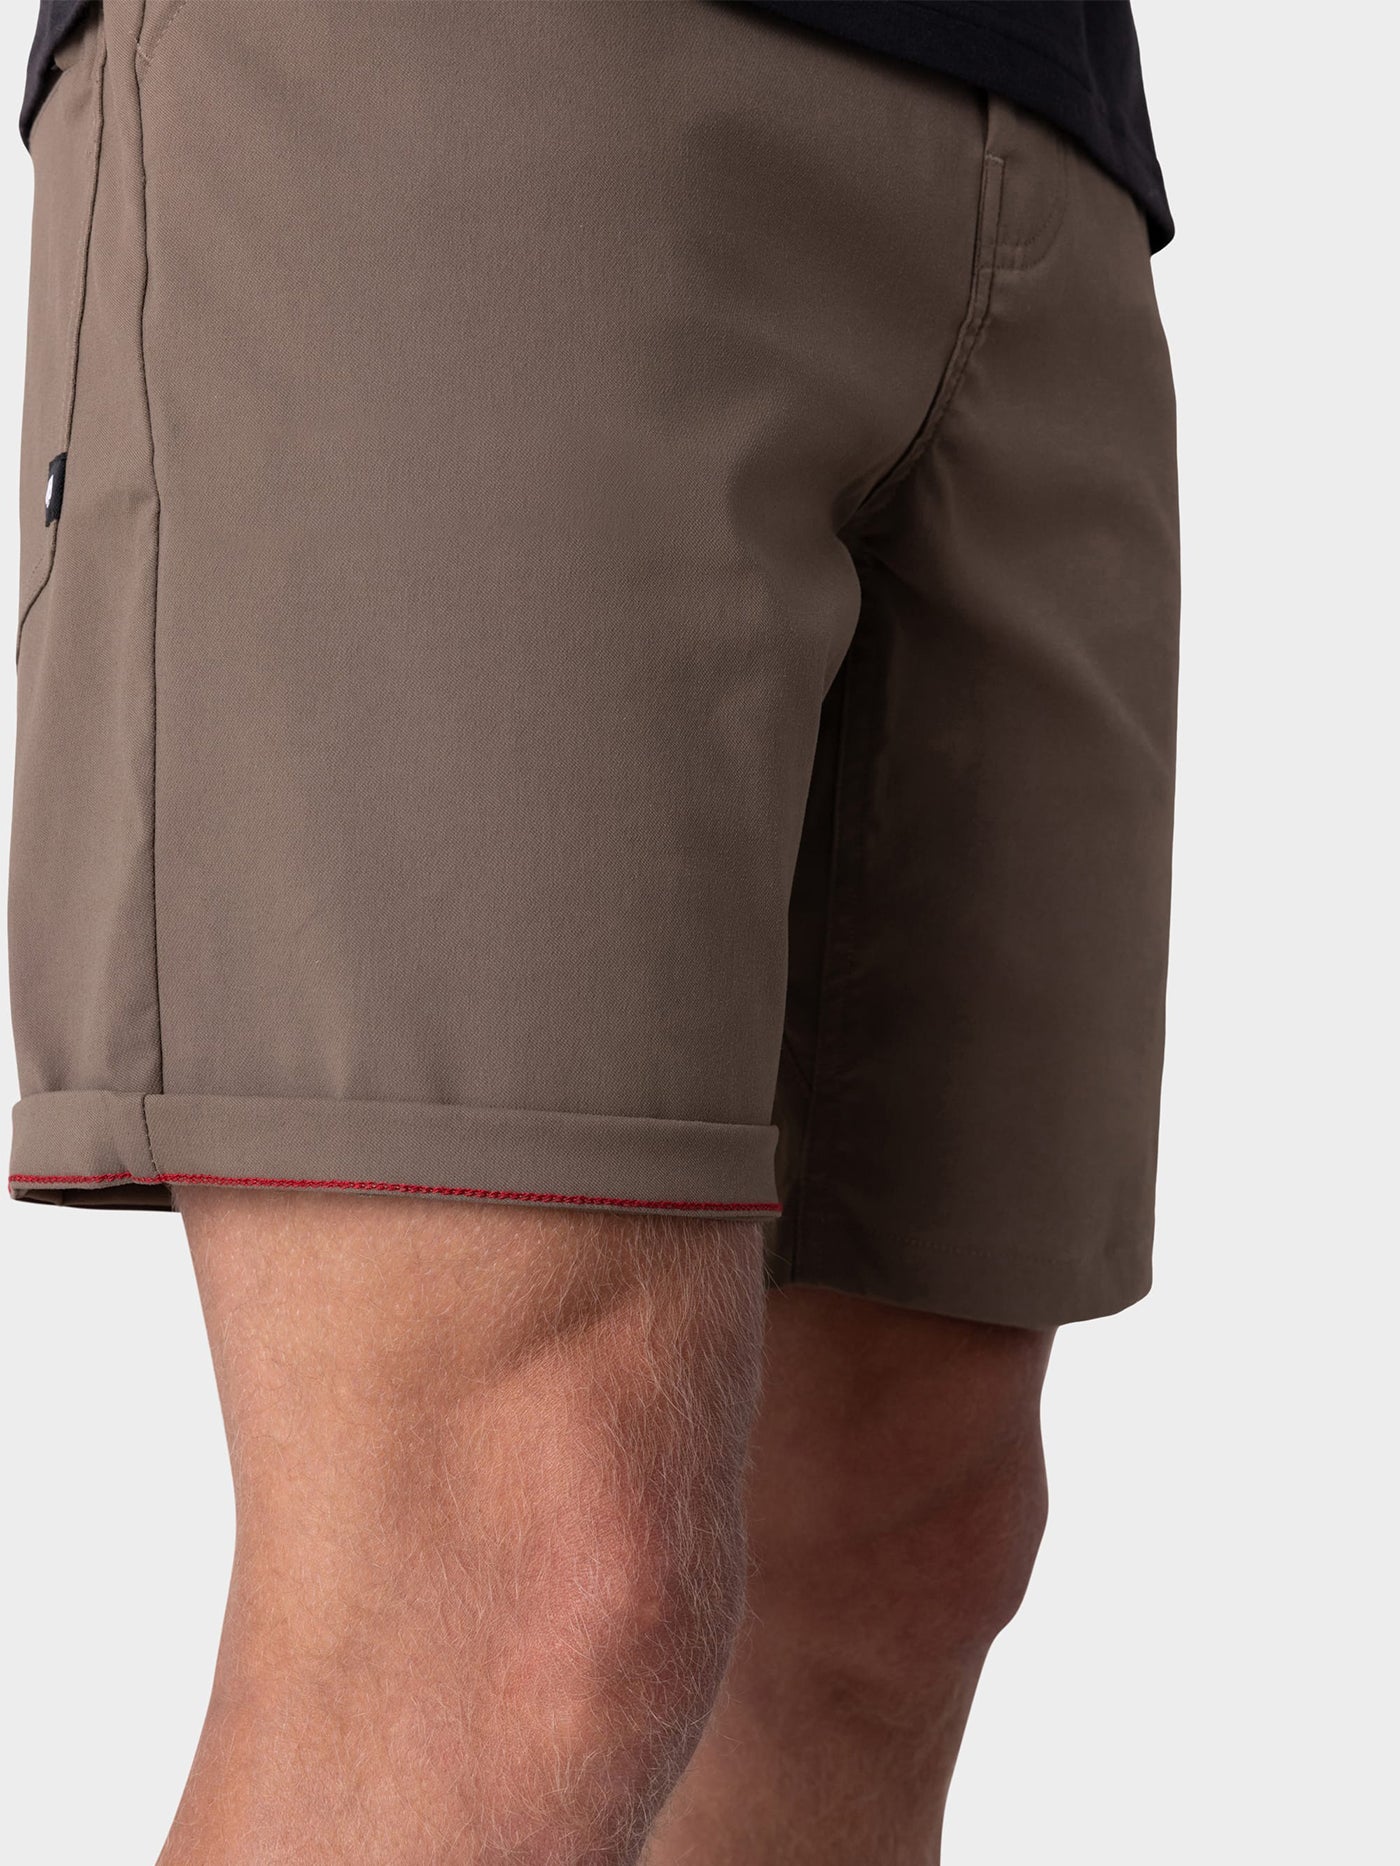 686 Everywhere Hybrid Relaxed Fit Shorts